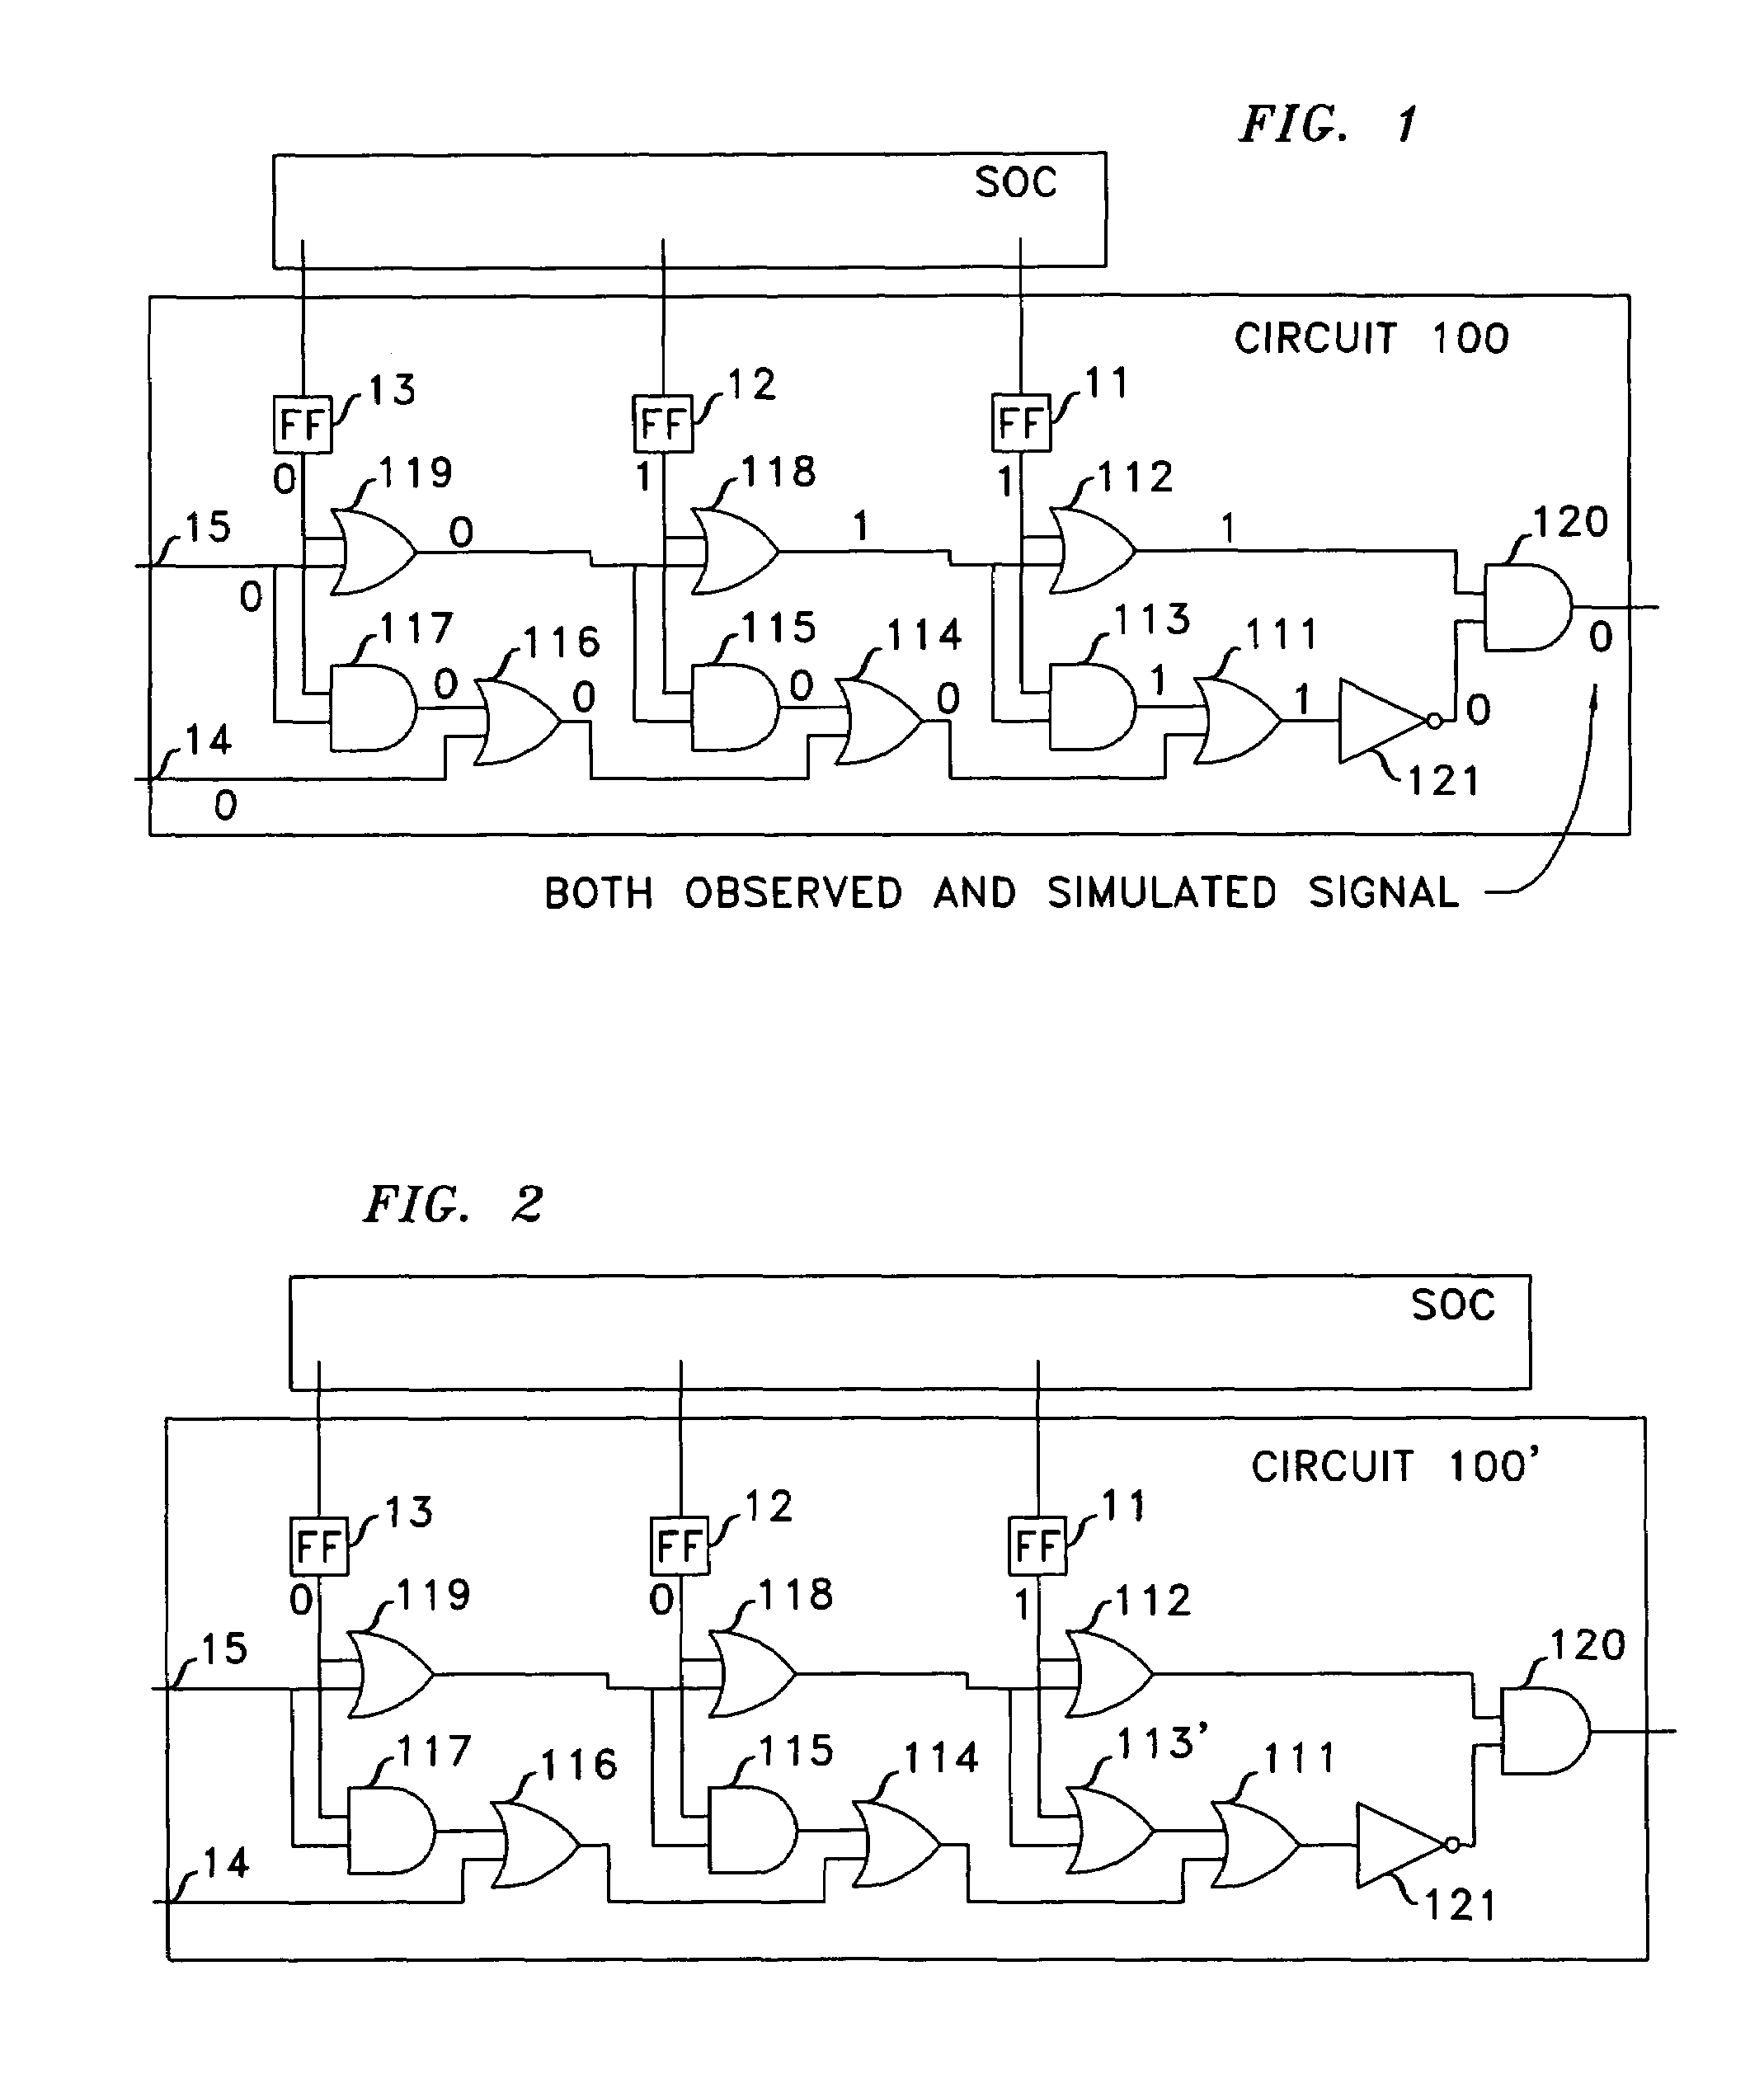 Method to locate logic errors and defects in digital circuits